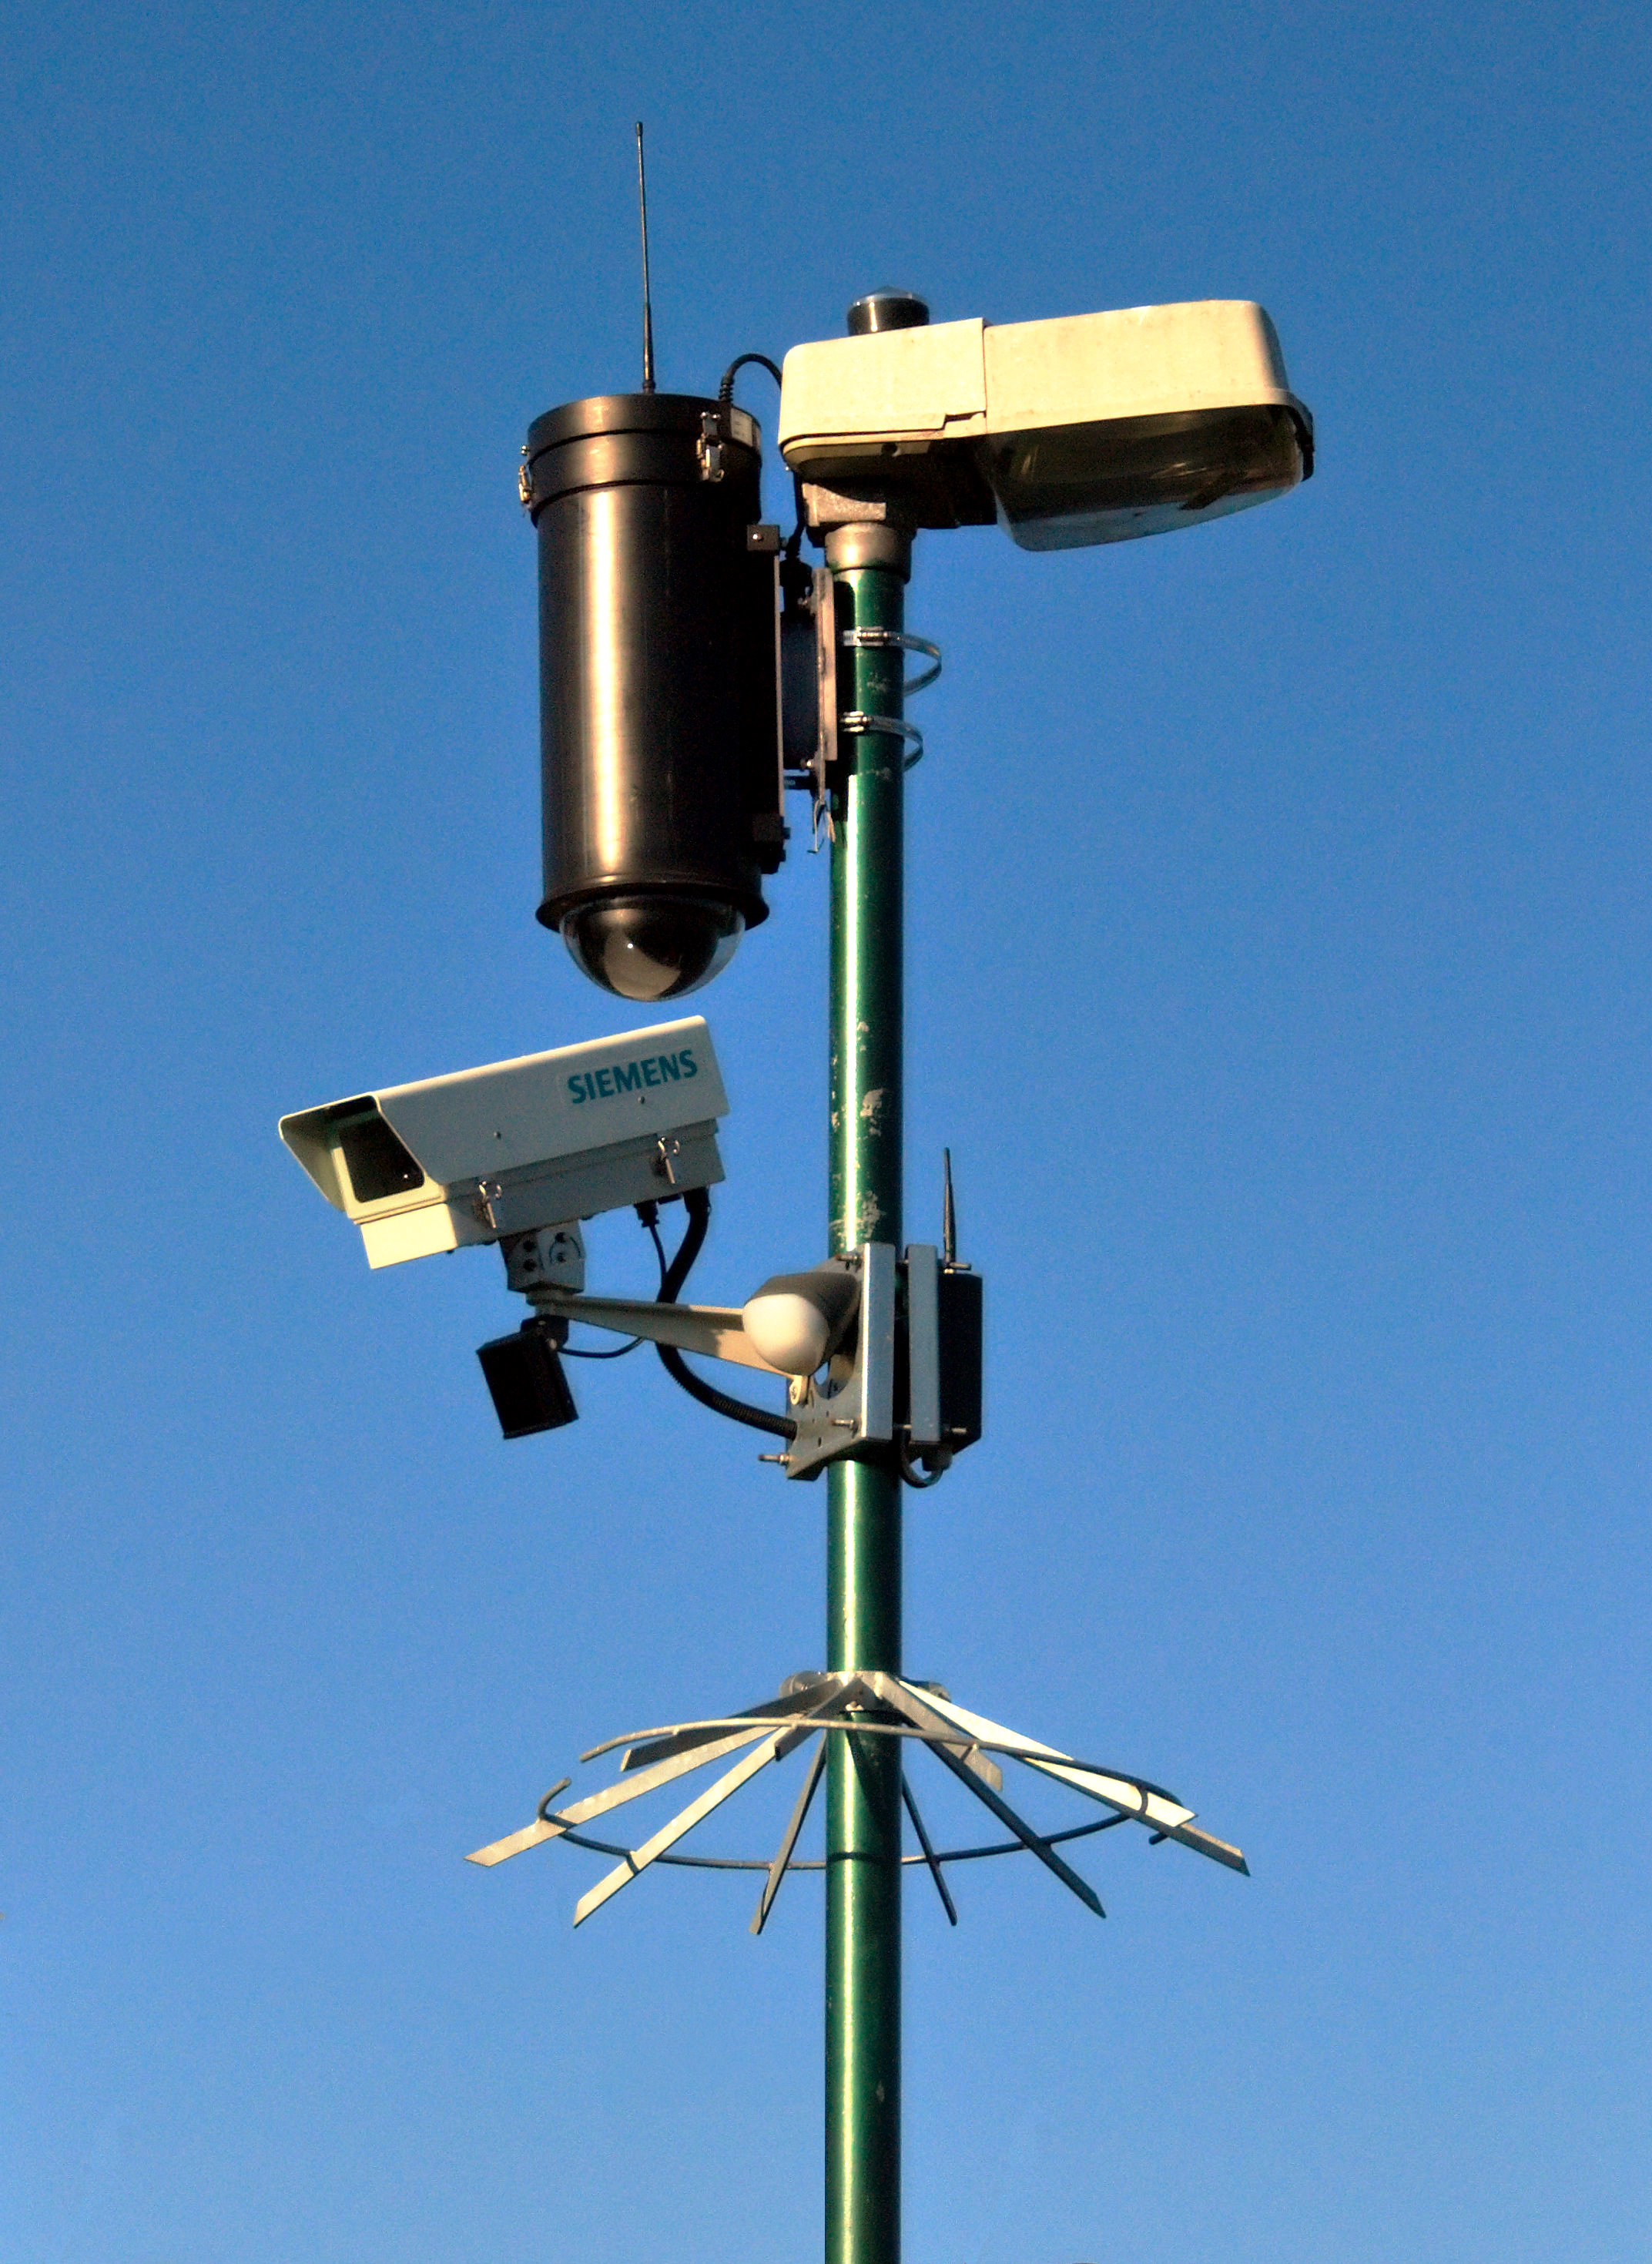 File:Tapo C100 security camera.jpg - Wikimedia Commons